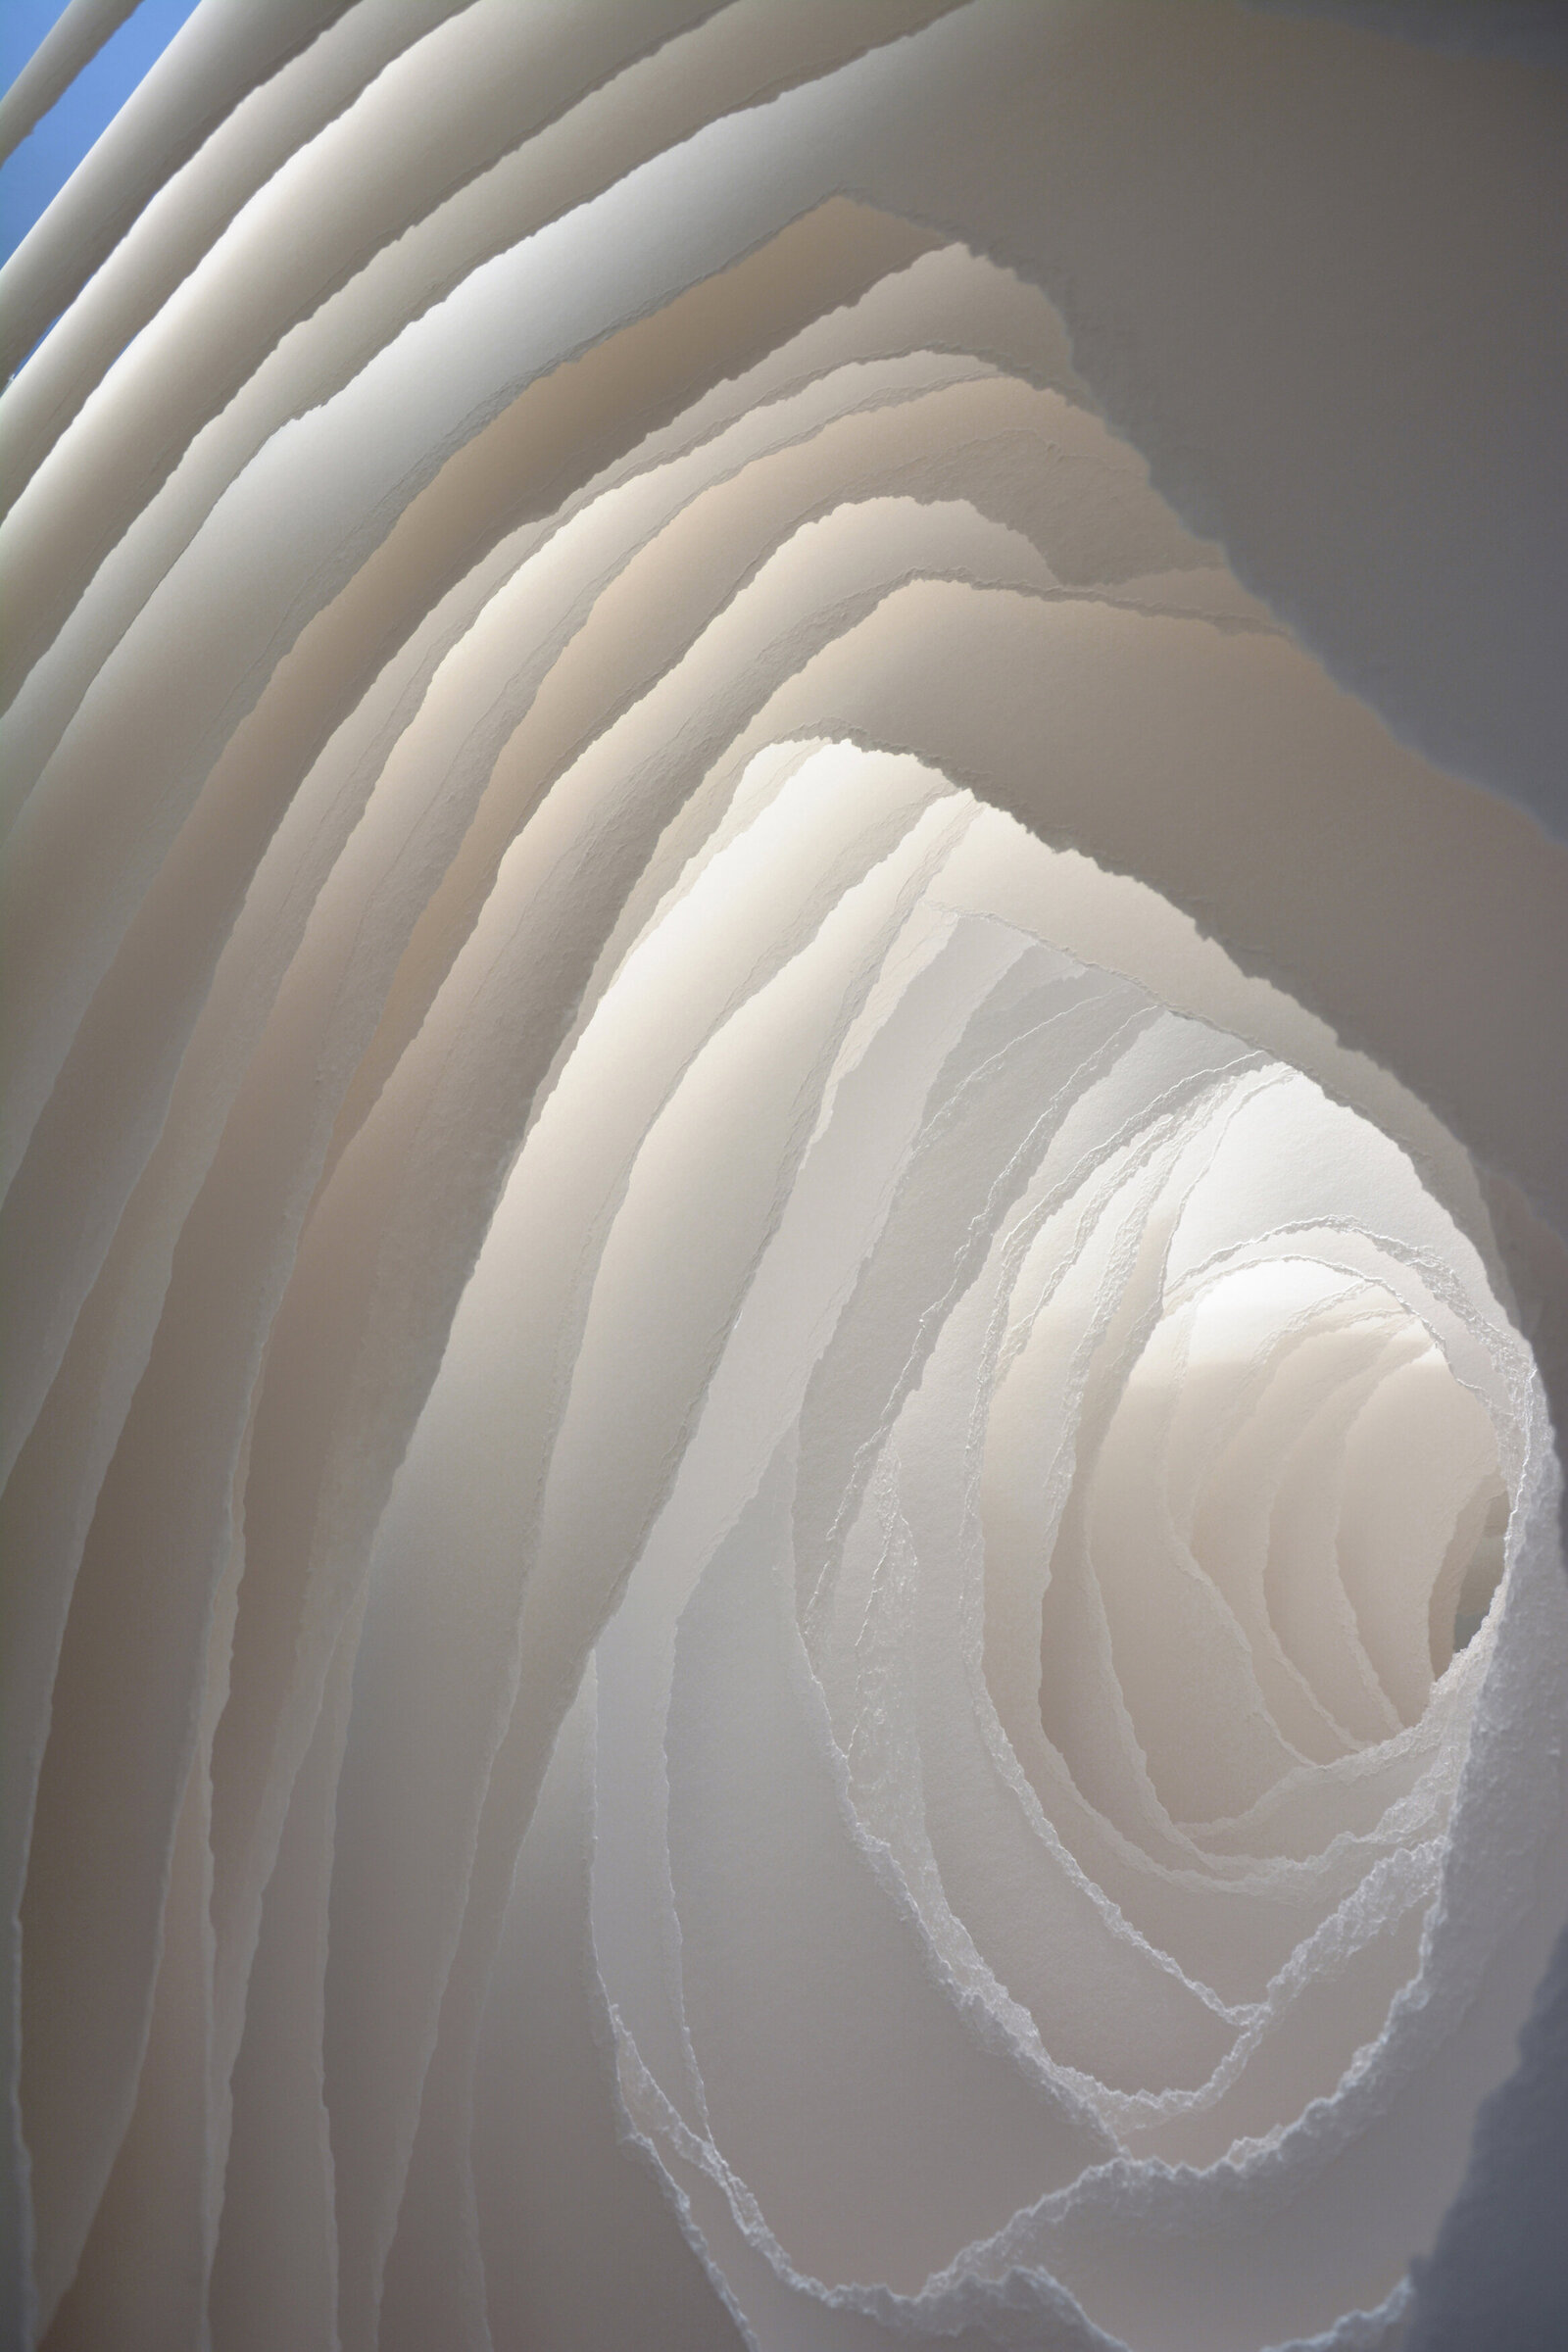 Sculpture of layers of paper torn into holes diminishing in size. Artwork titled Terforation by Angela Glajcar.